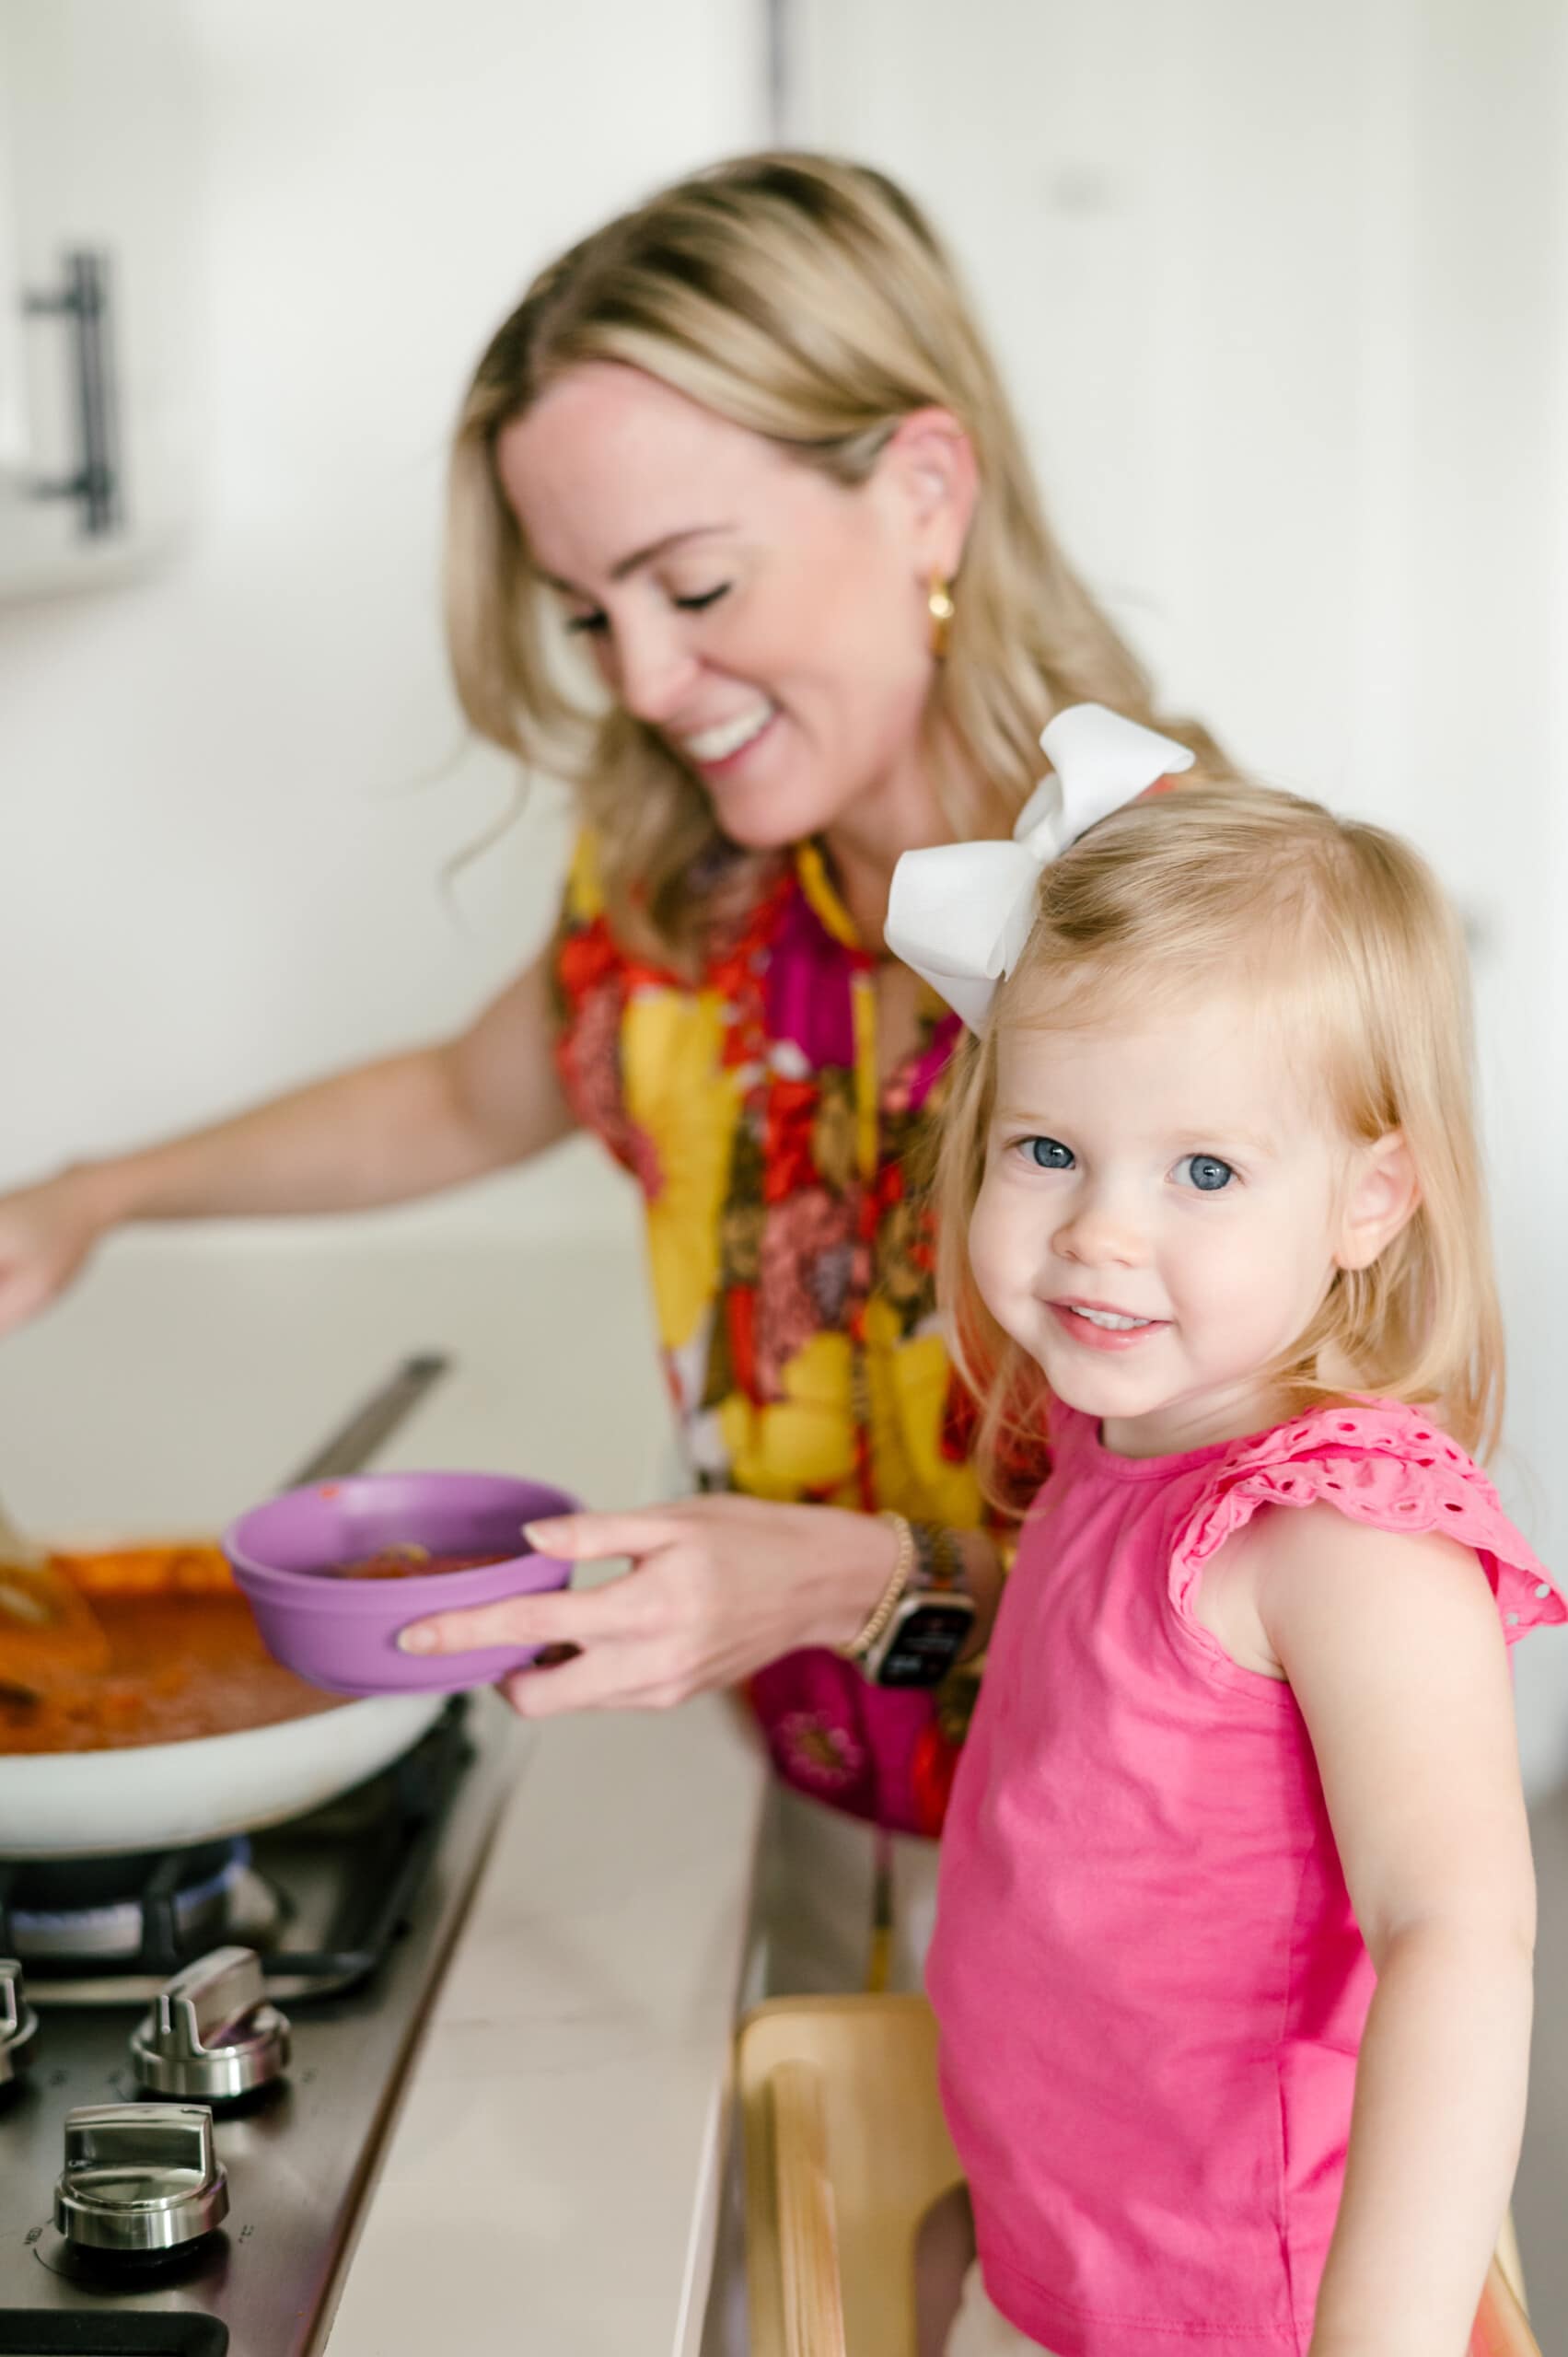 Young daughter smiling at the camera while her mom on the background is stirring pasta sauce at the stove.